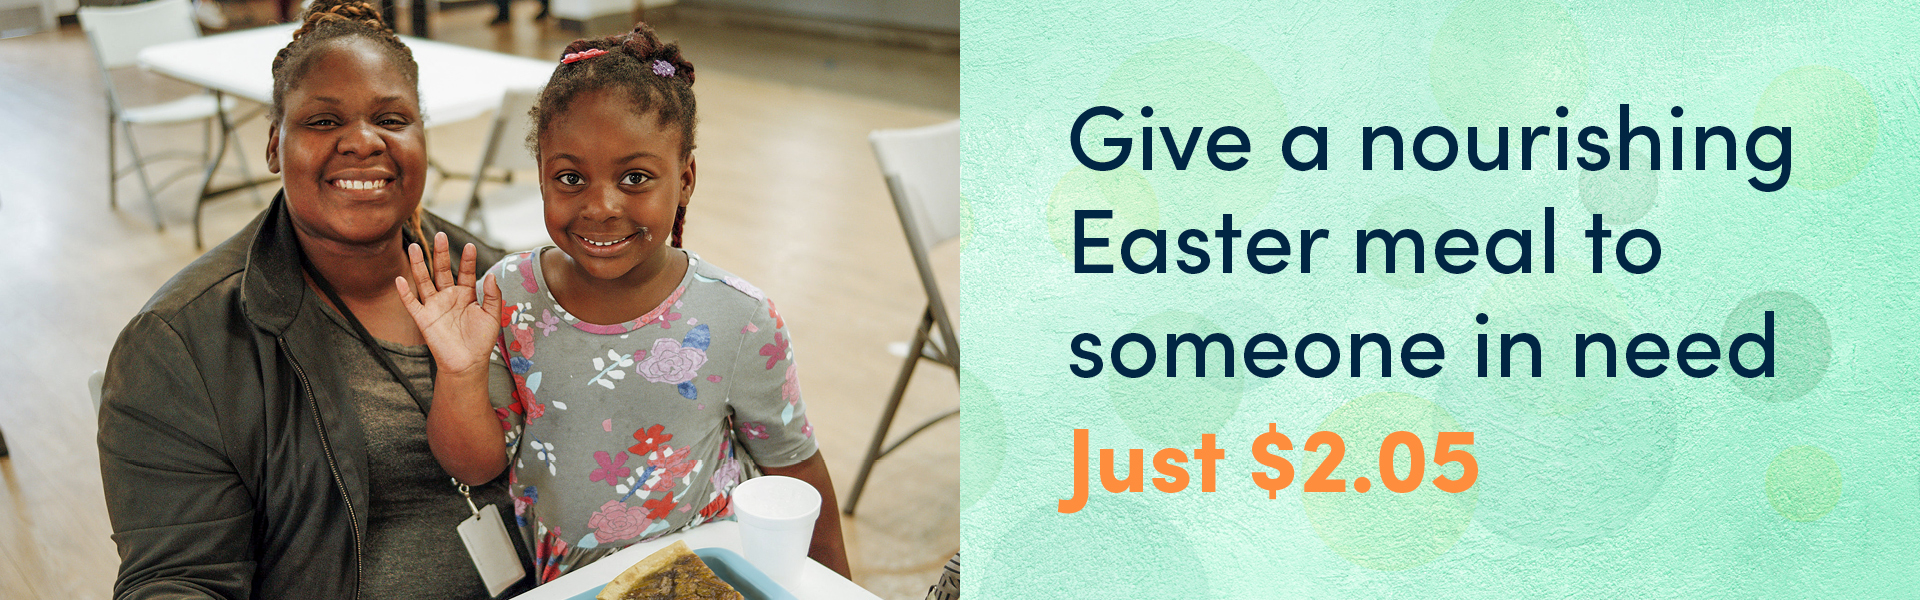 Give a nourishing Easter meal to someone in need